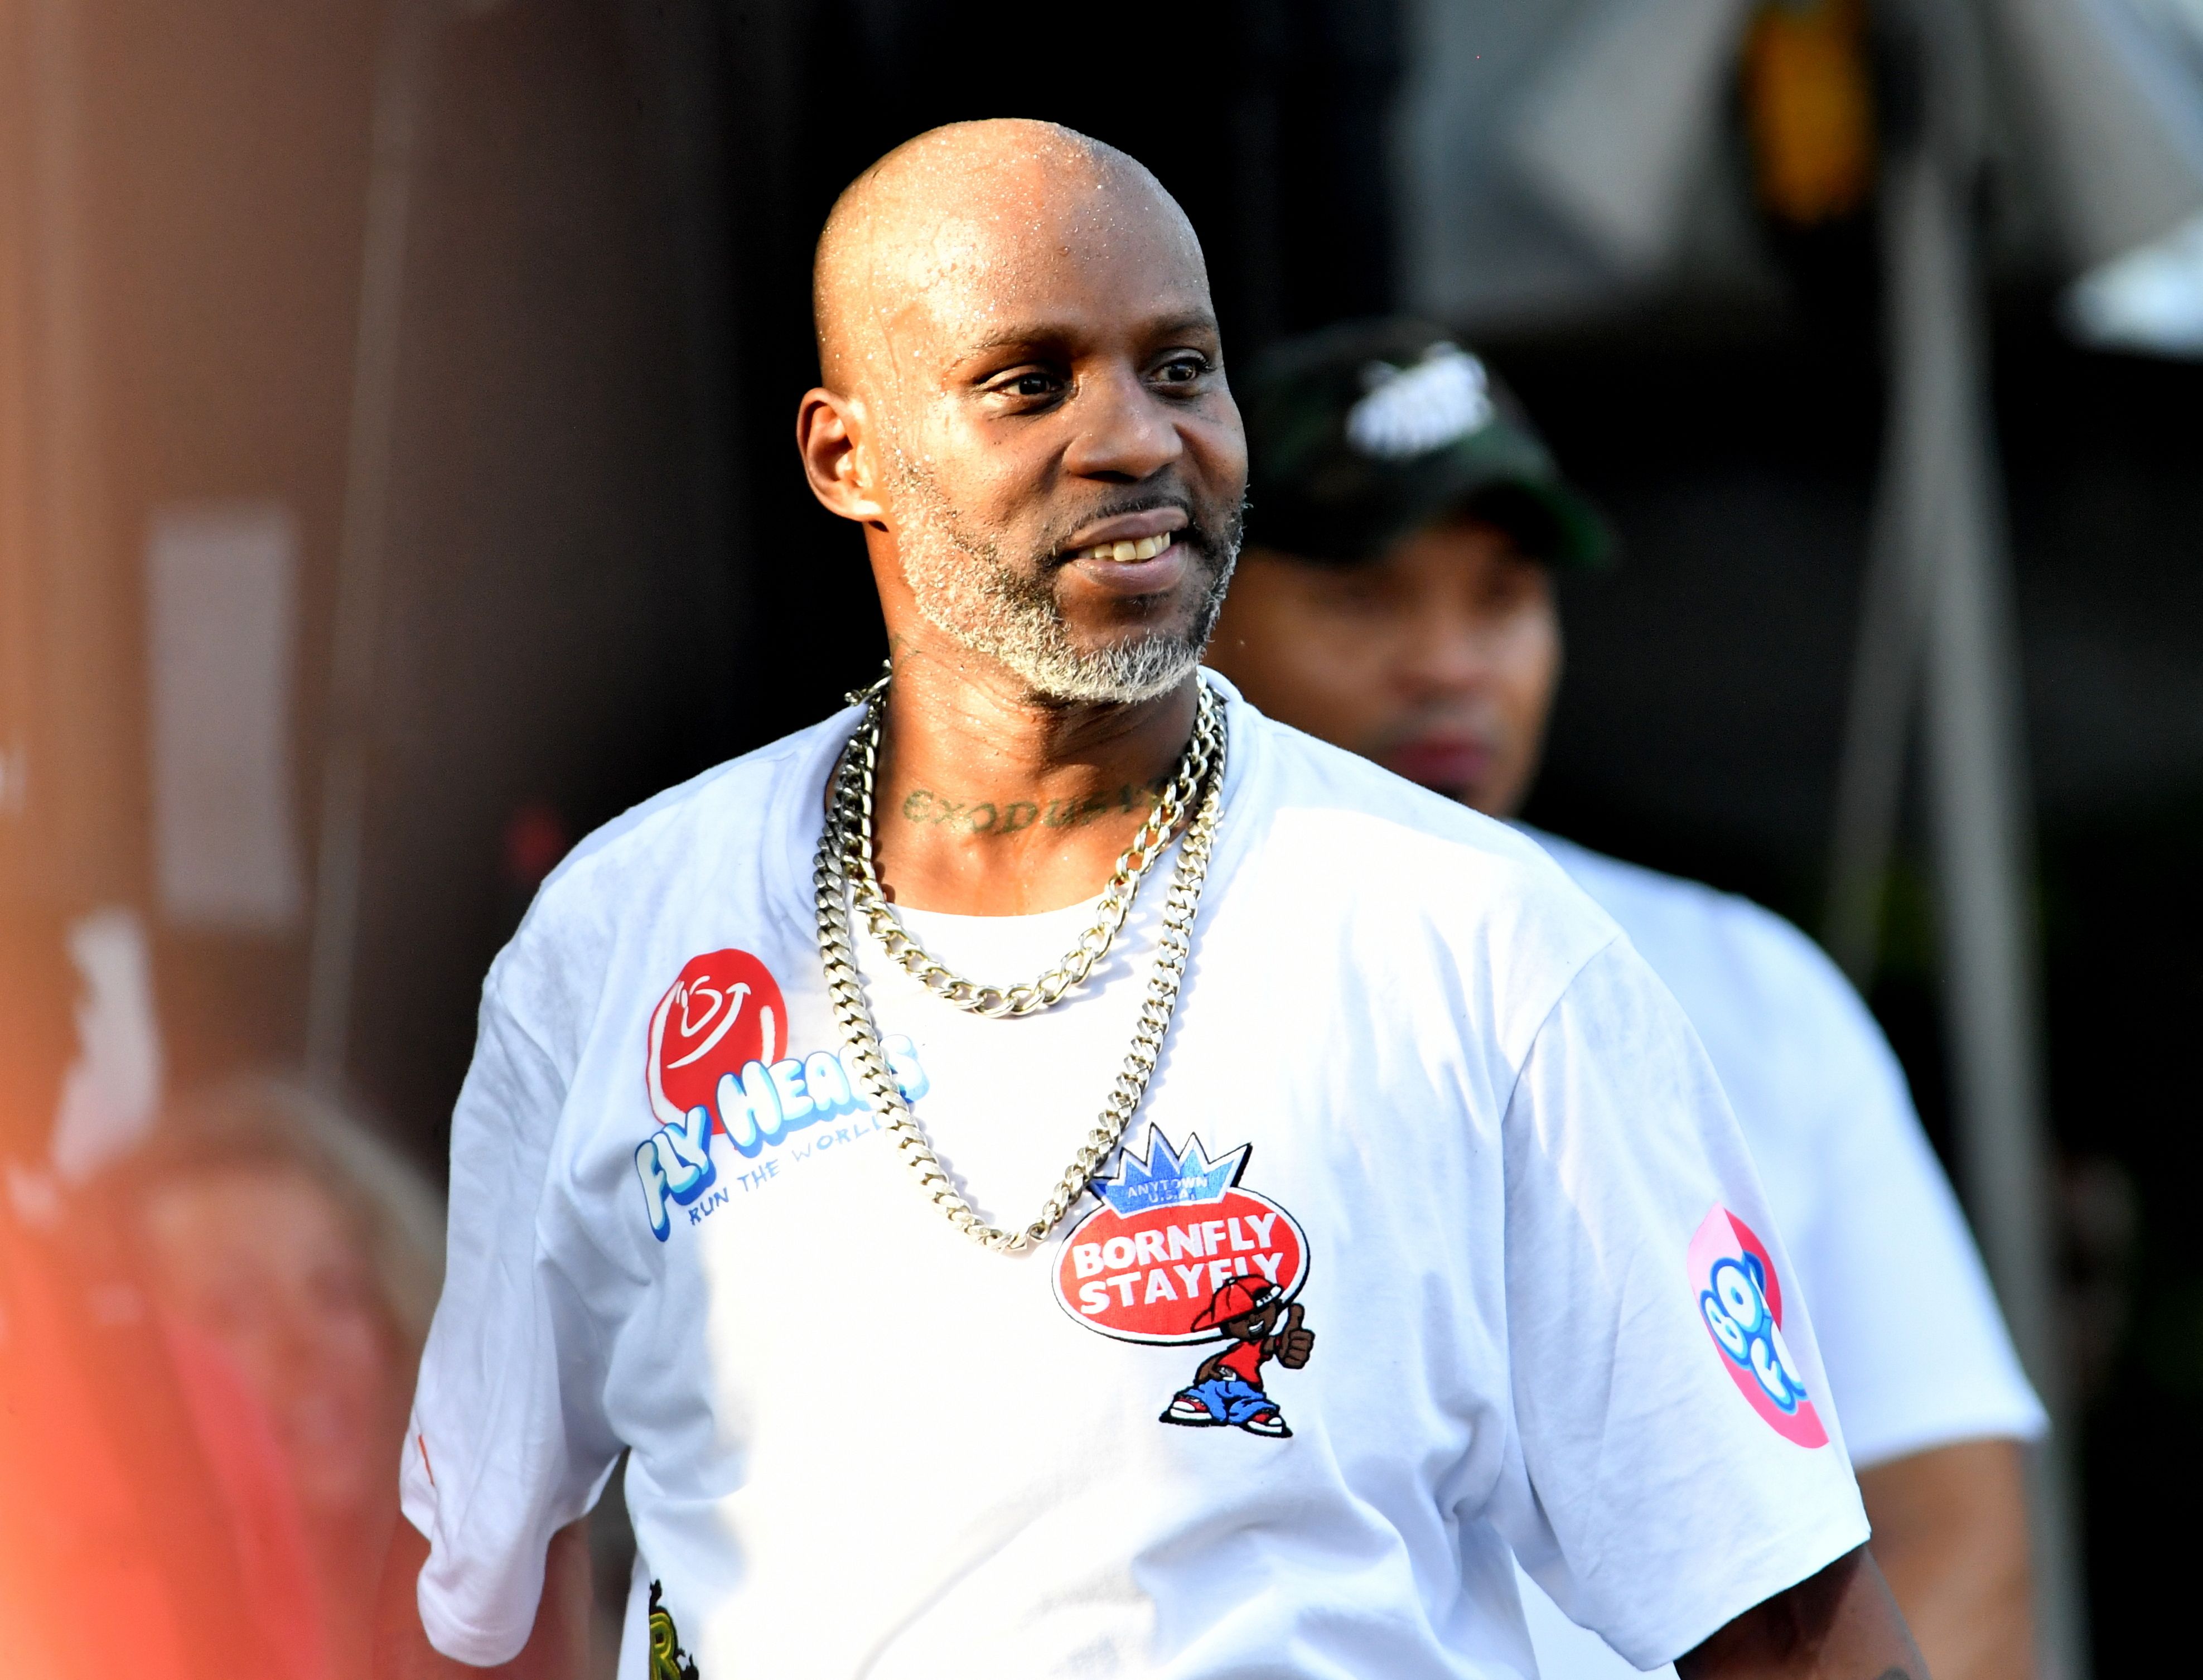 DMX performs at the Annual ONE Musicfest on September 8, 2019 | Photo: Getty Images